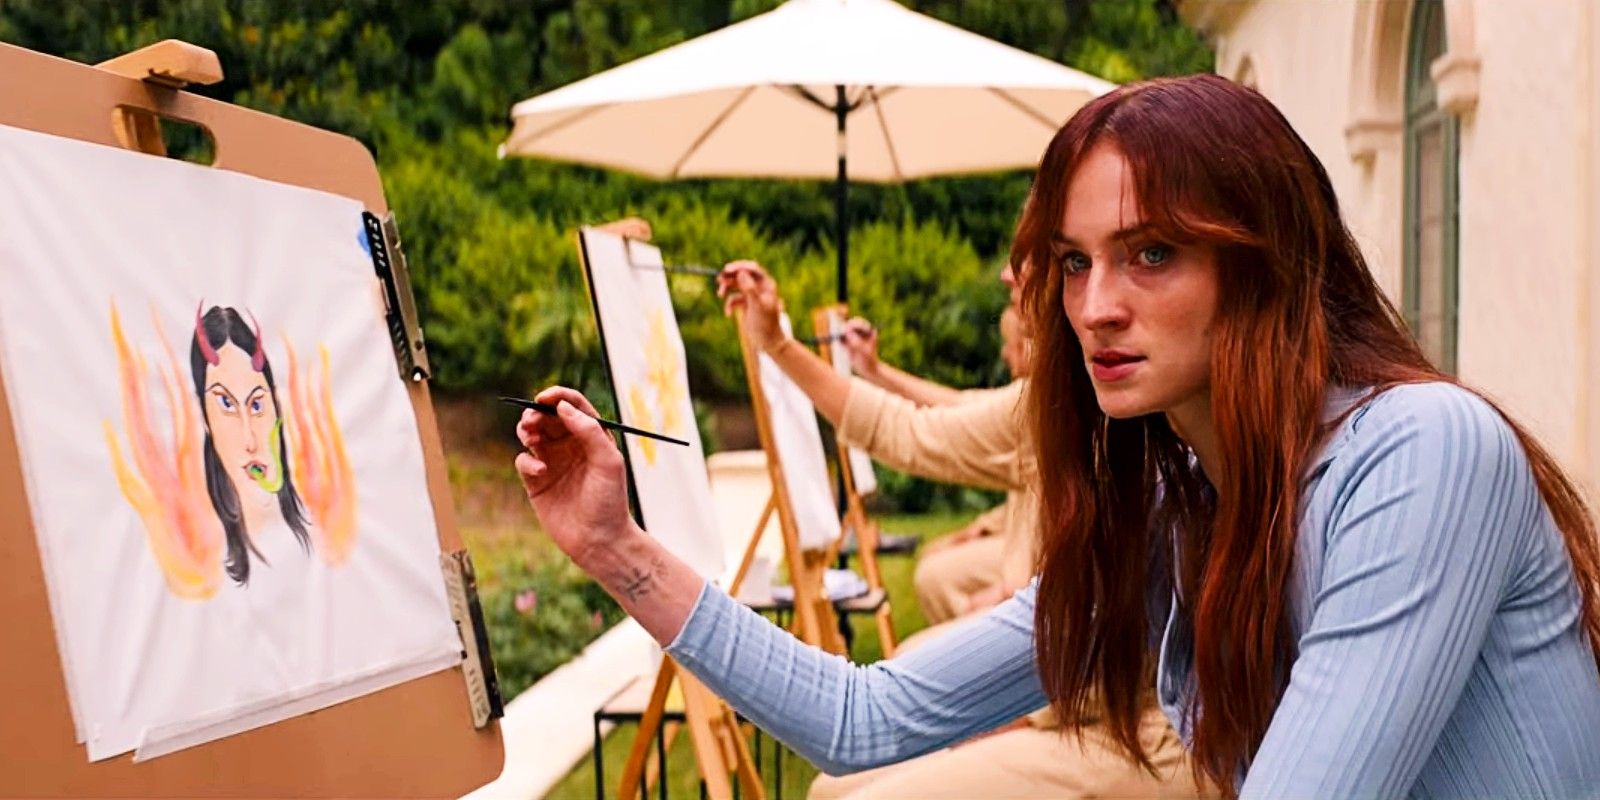 Sophie Turner as Erica Norman in Do Revenge painting a portrait of Drea as the devil